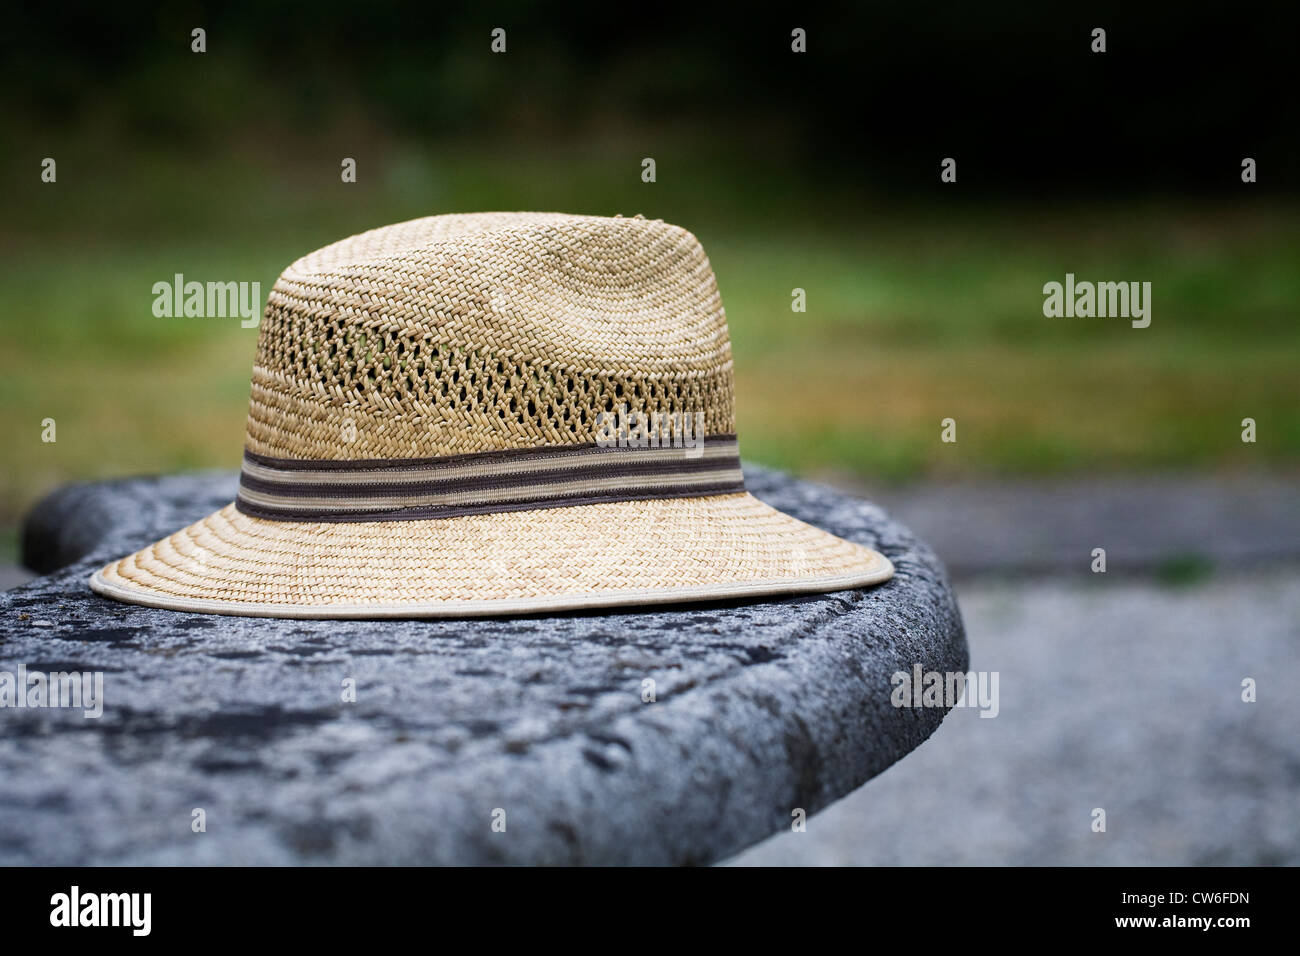 Man's straw hat on an old stone bench. Stock Photo